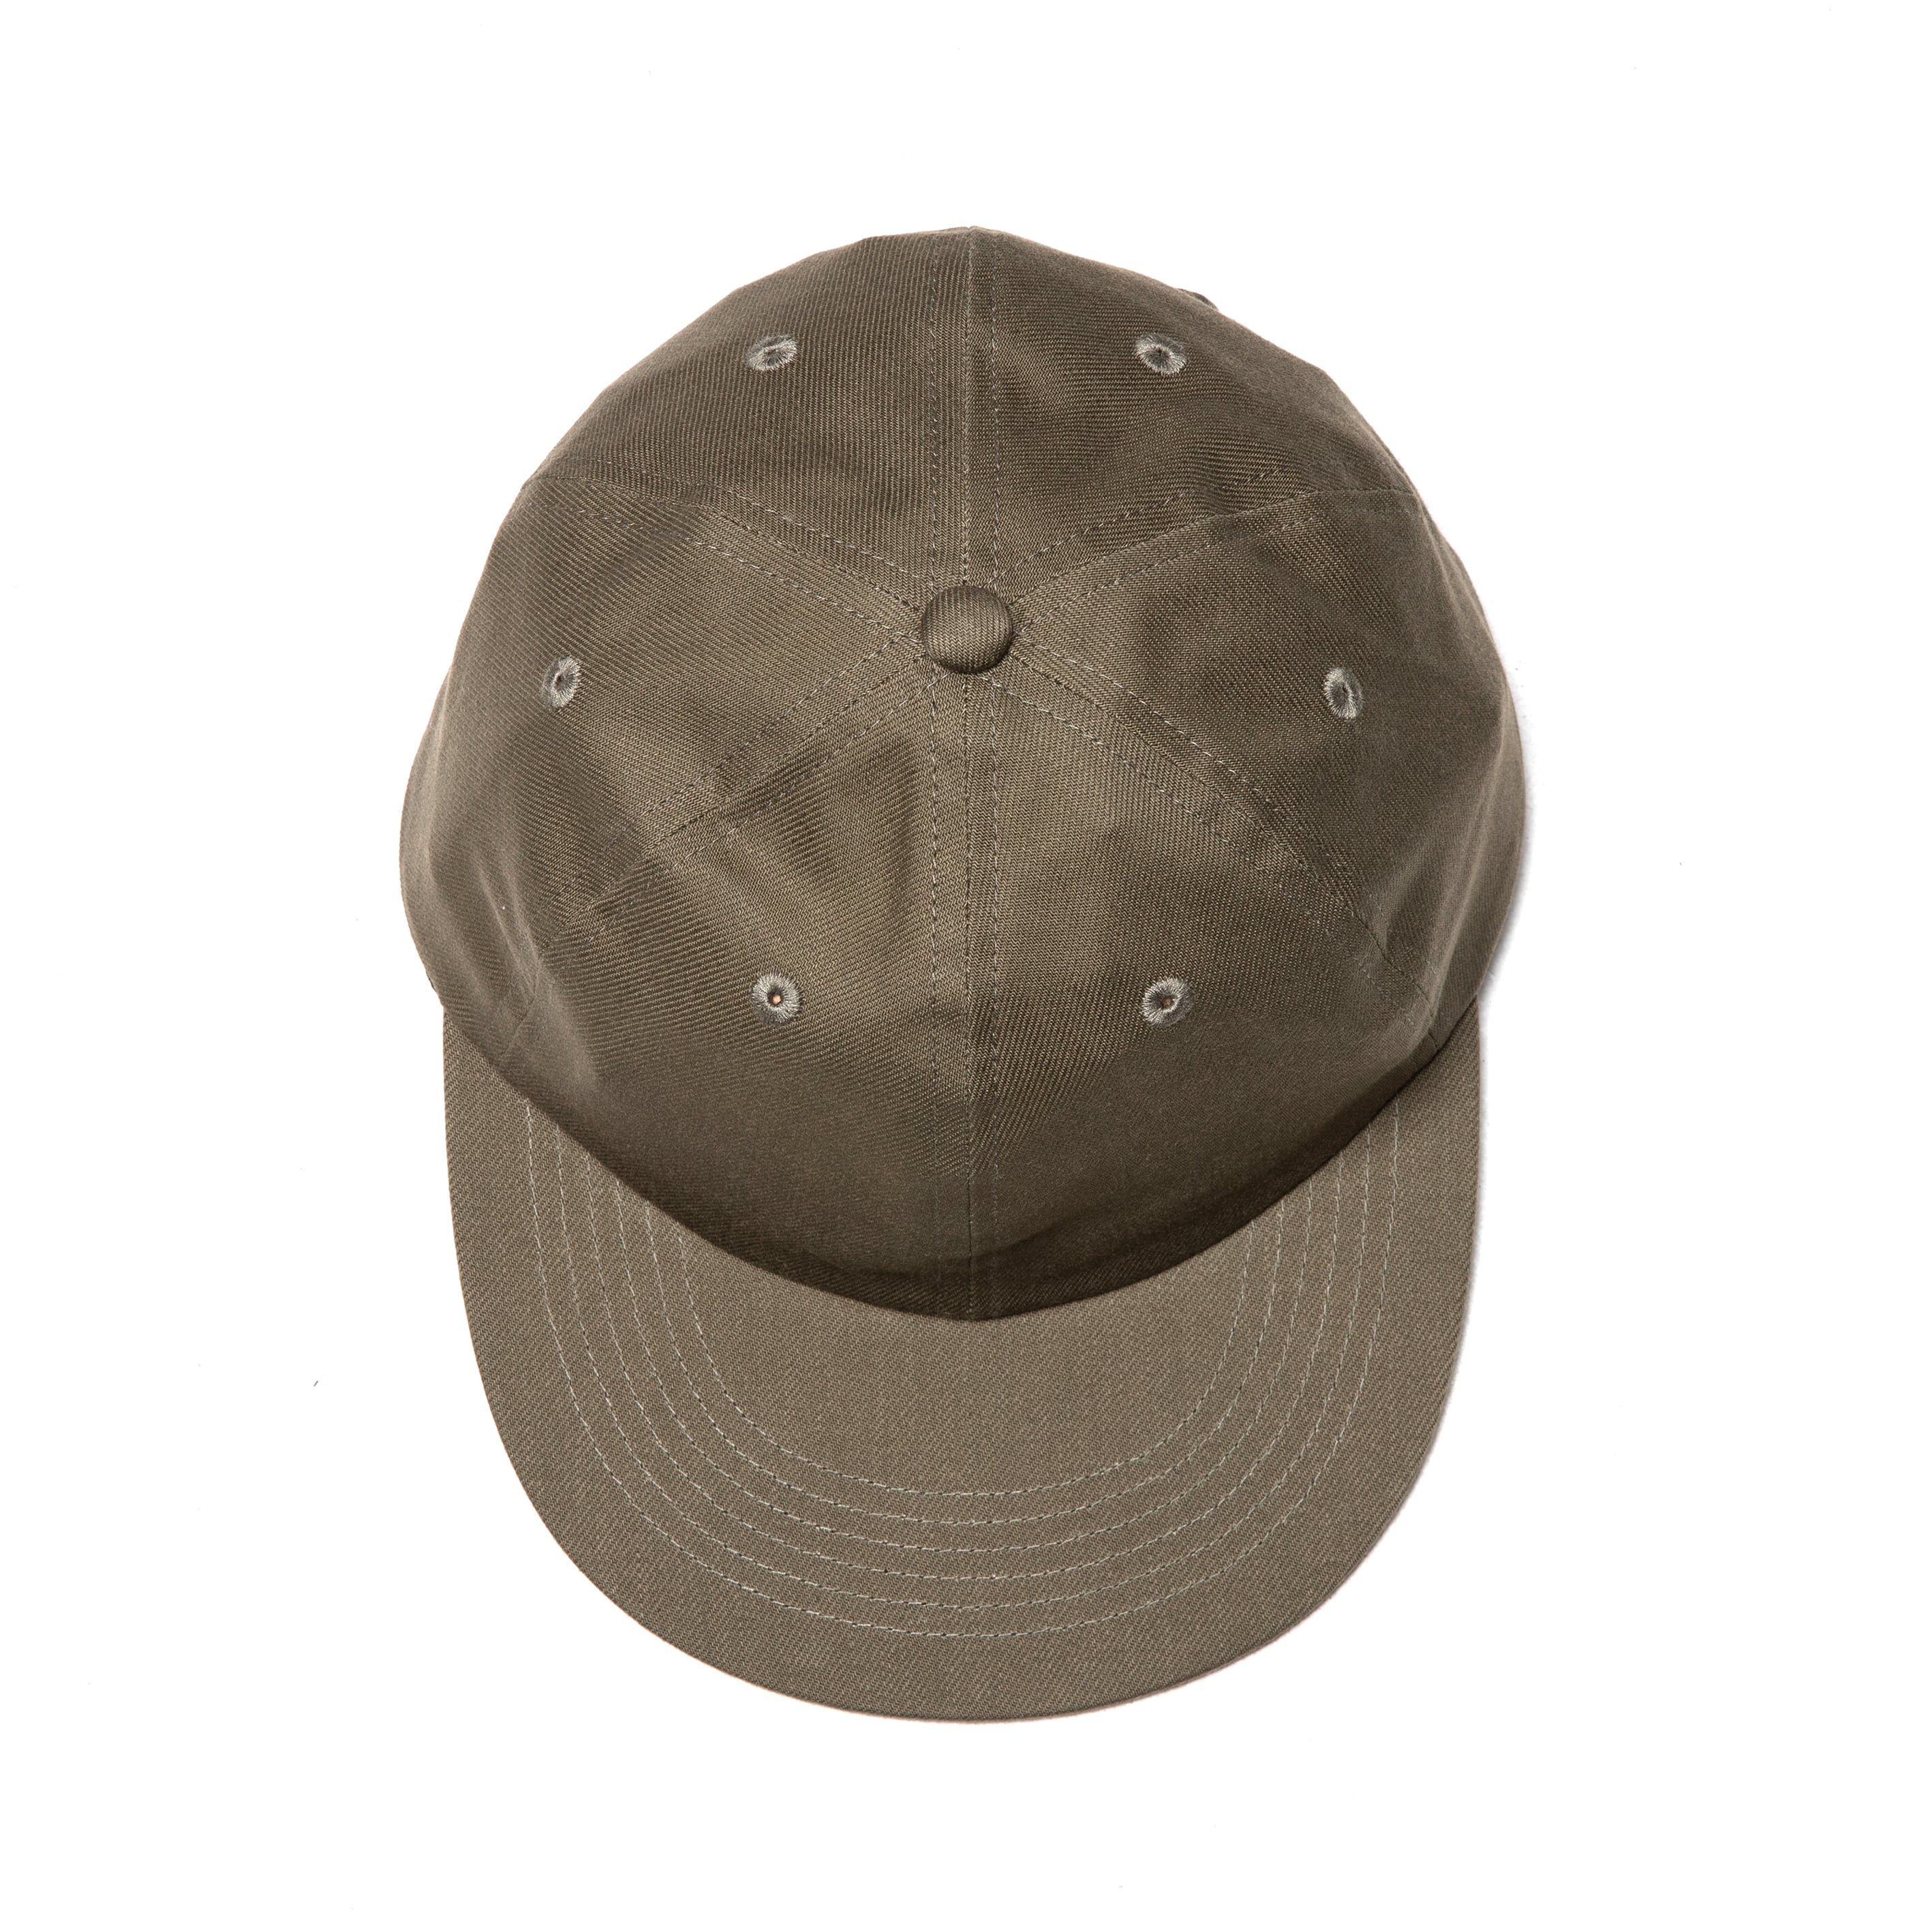 ovy Vintage French Drill 6 Panel Cap